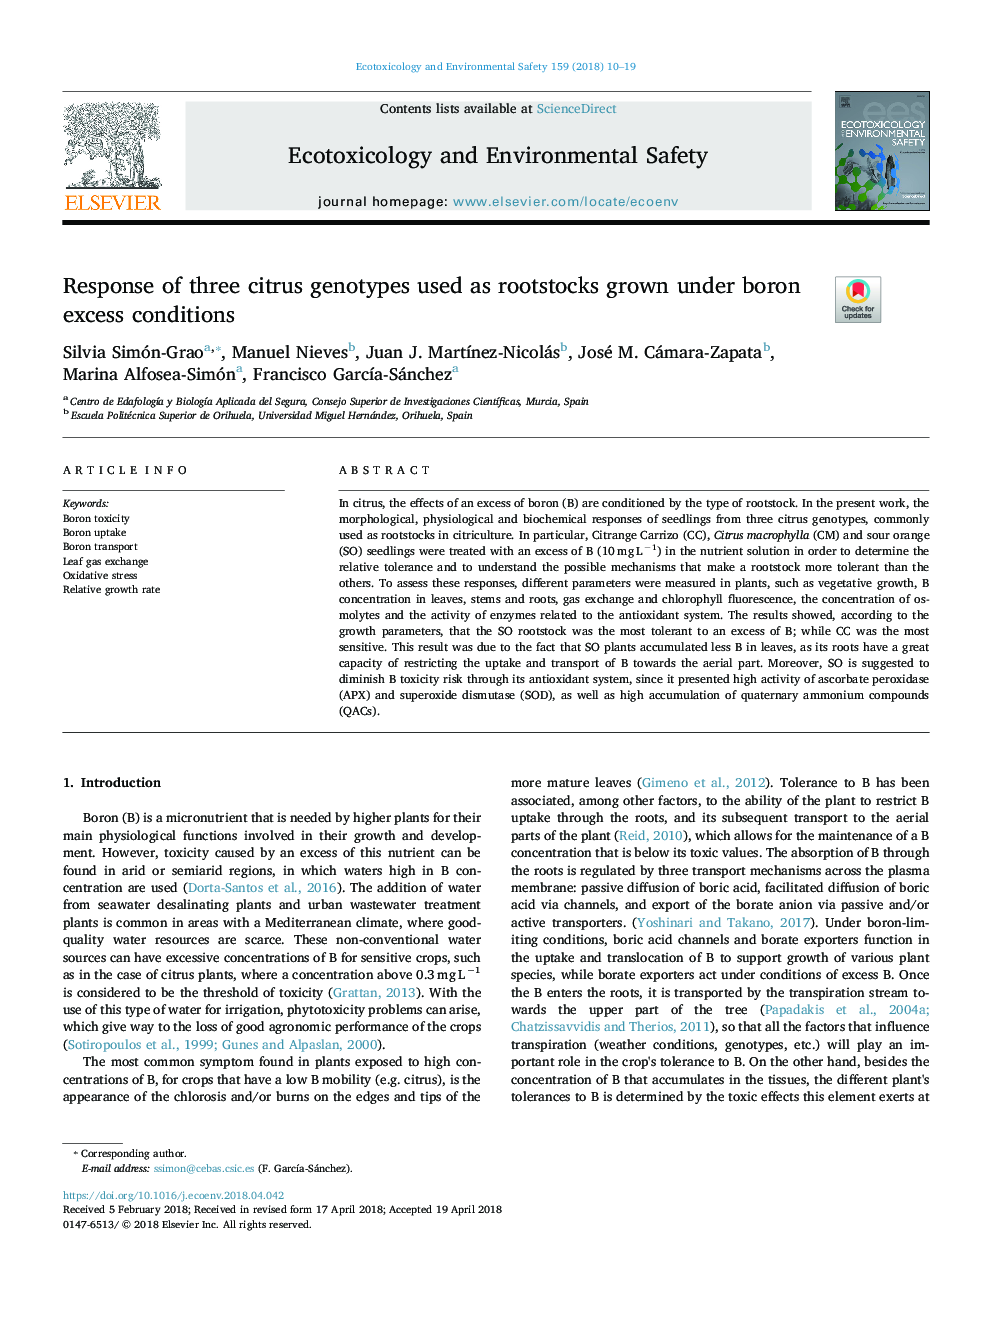 Response of three citrus genotypes used as rootstocks grown under boron excess conditions